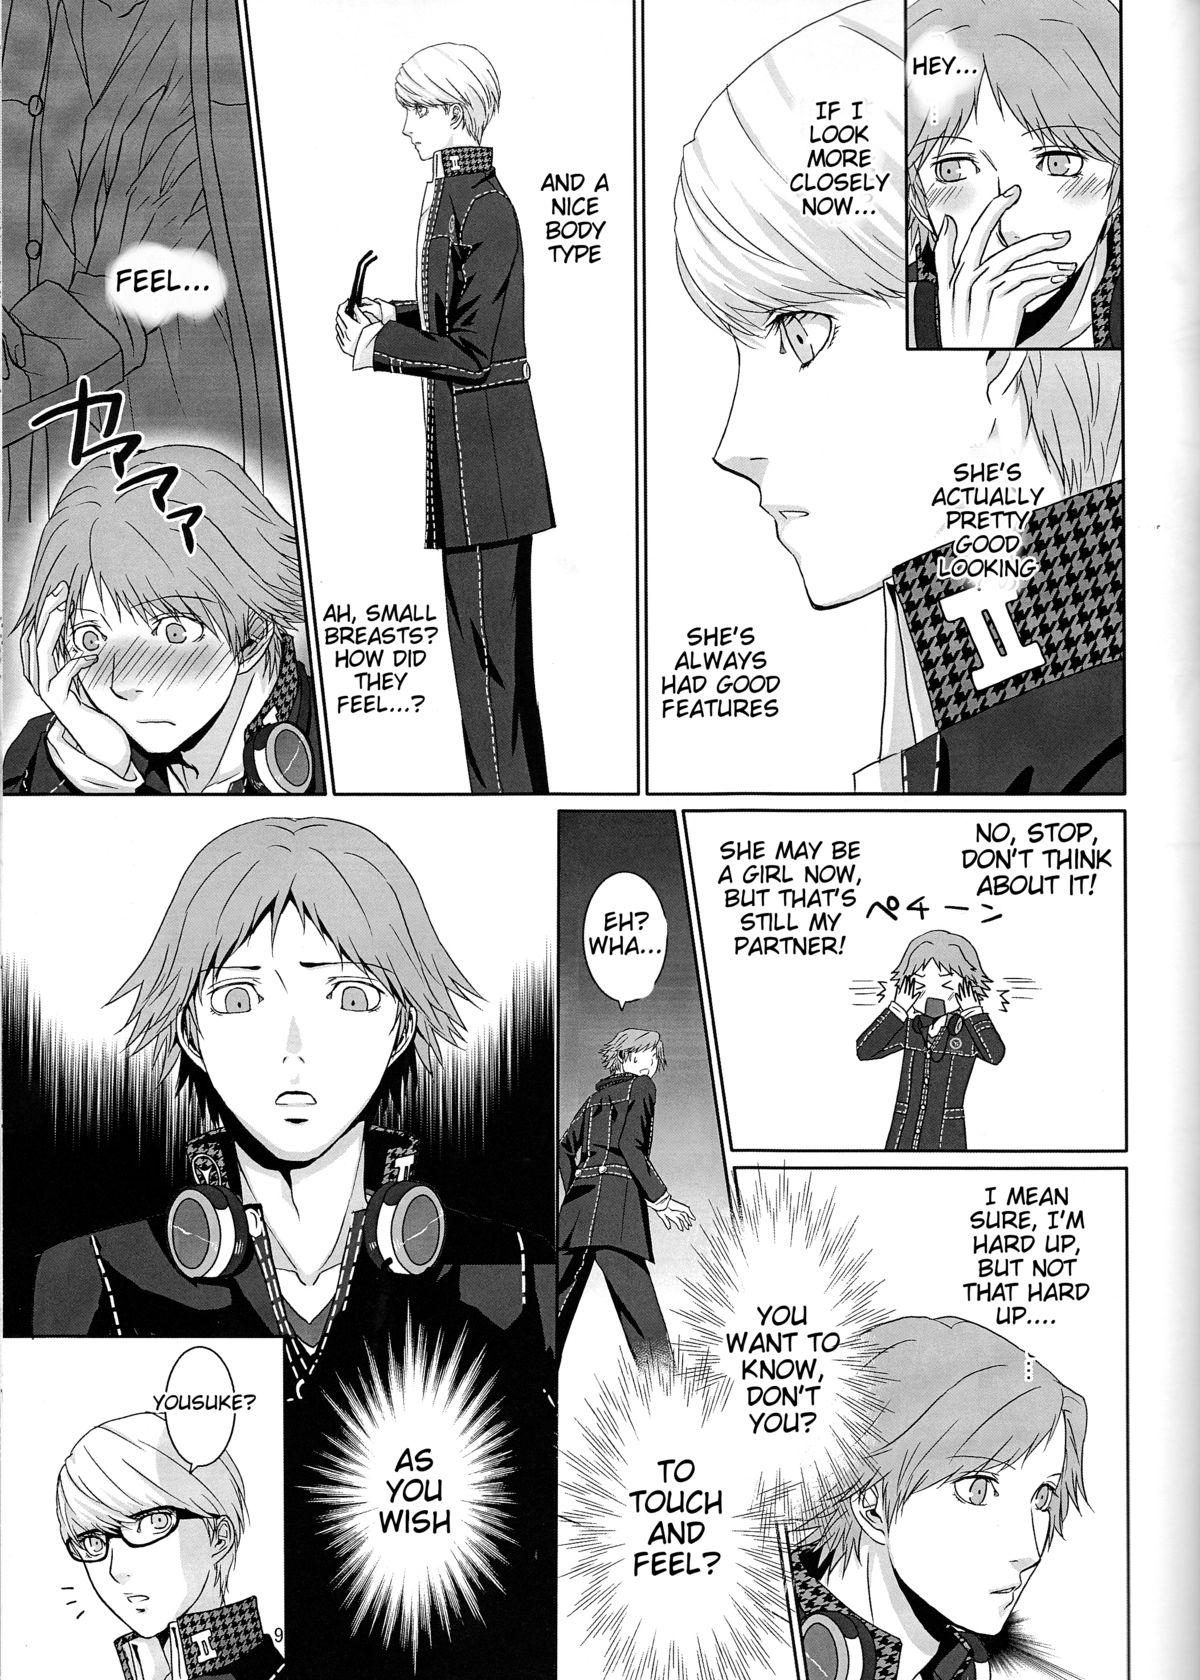 Teen what happened?! - Persona 4 Bigbutt - Page 10